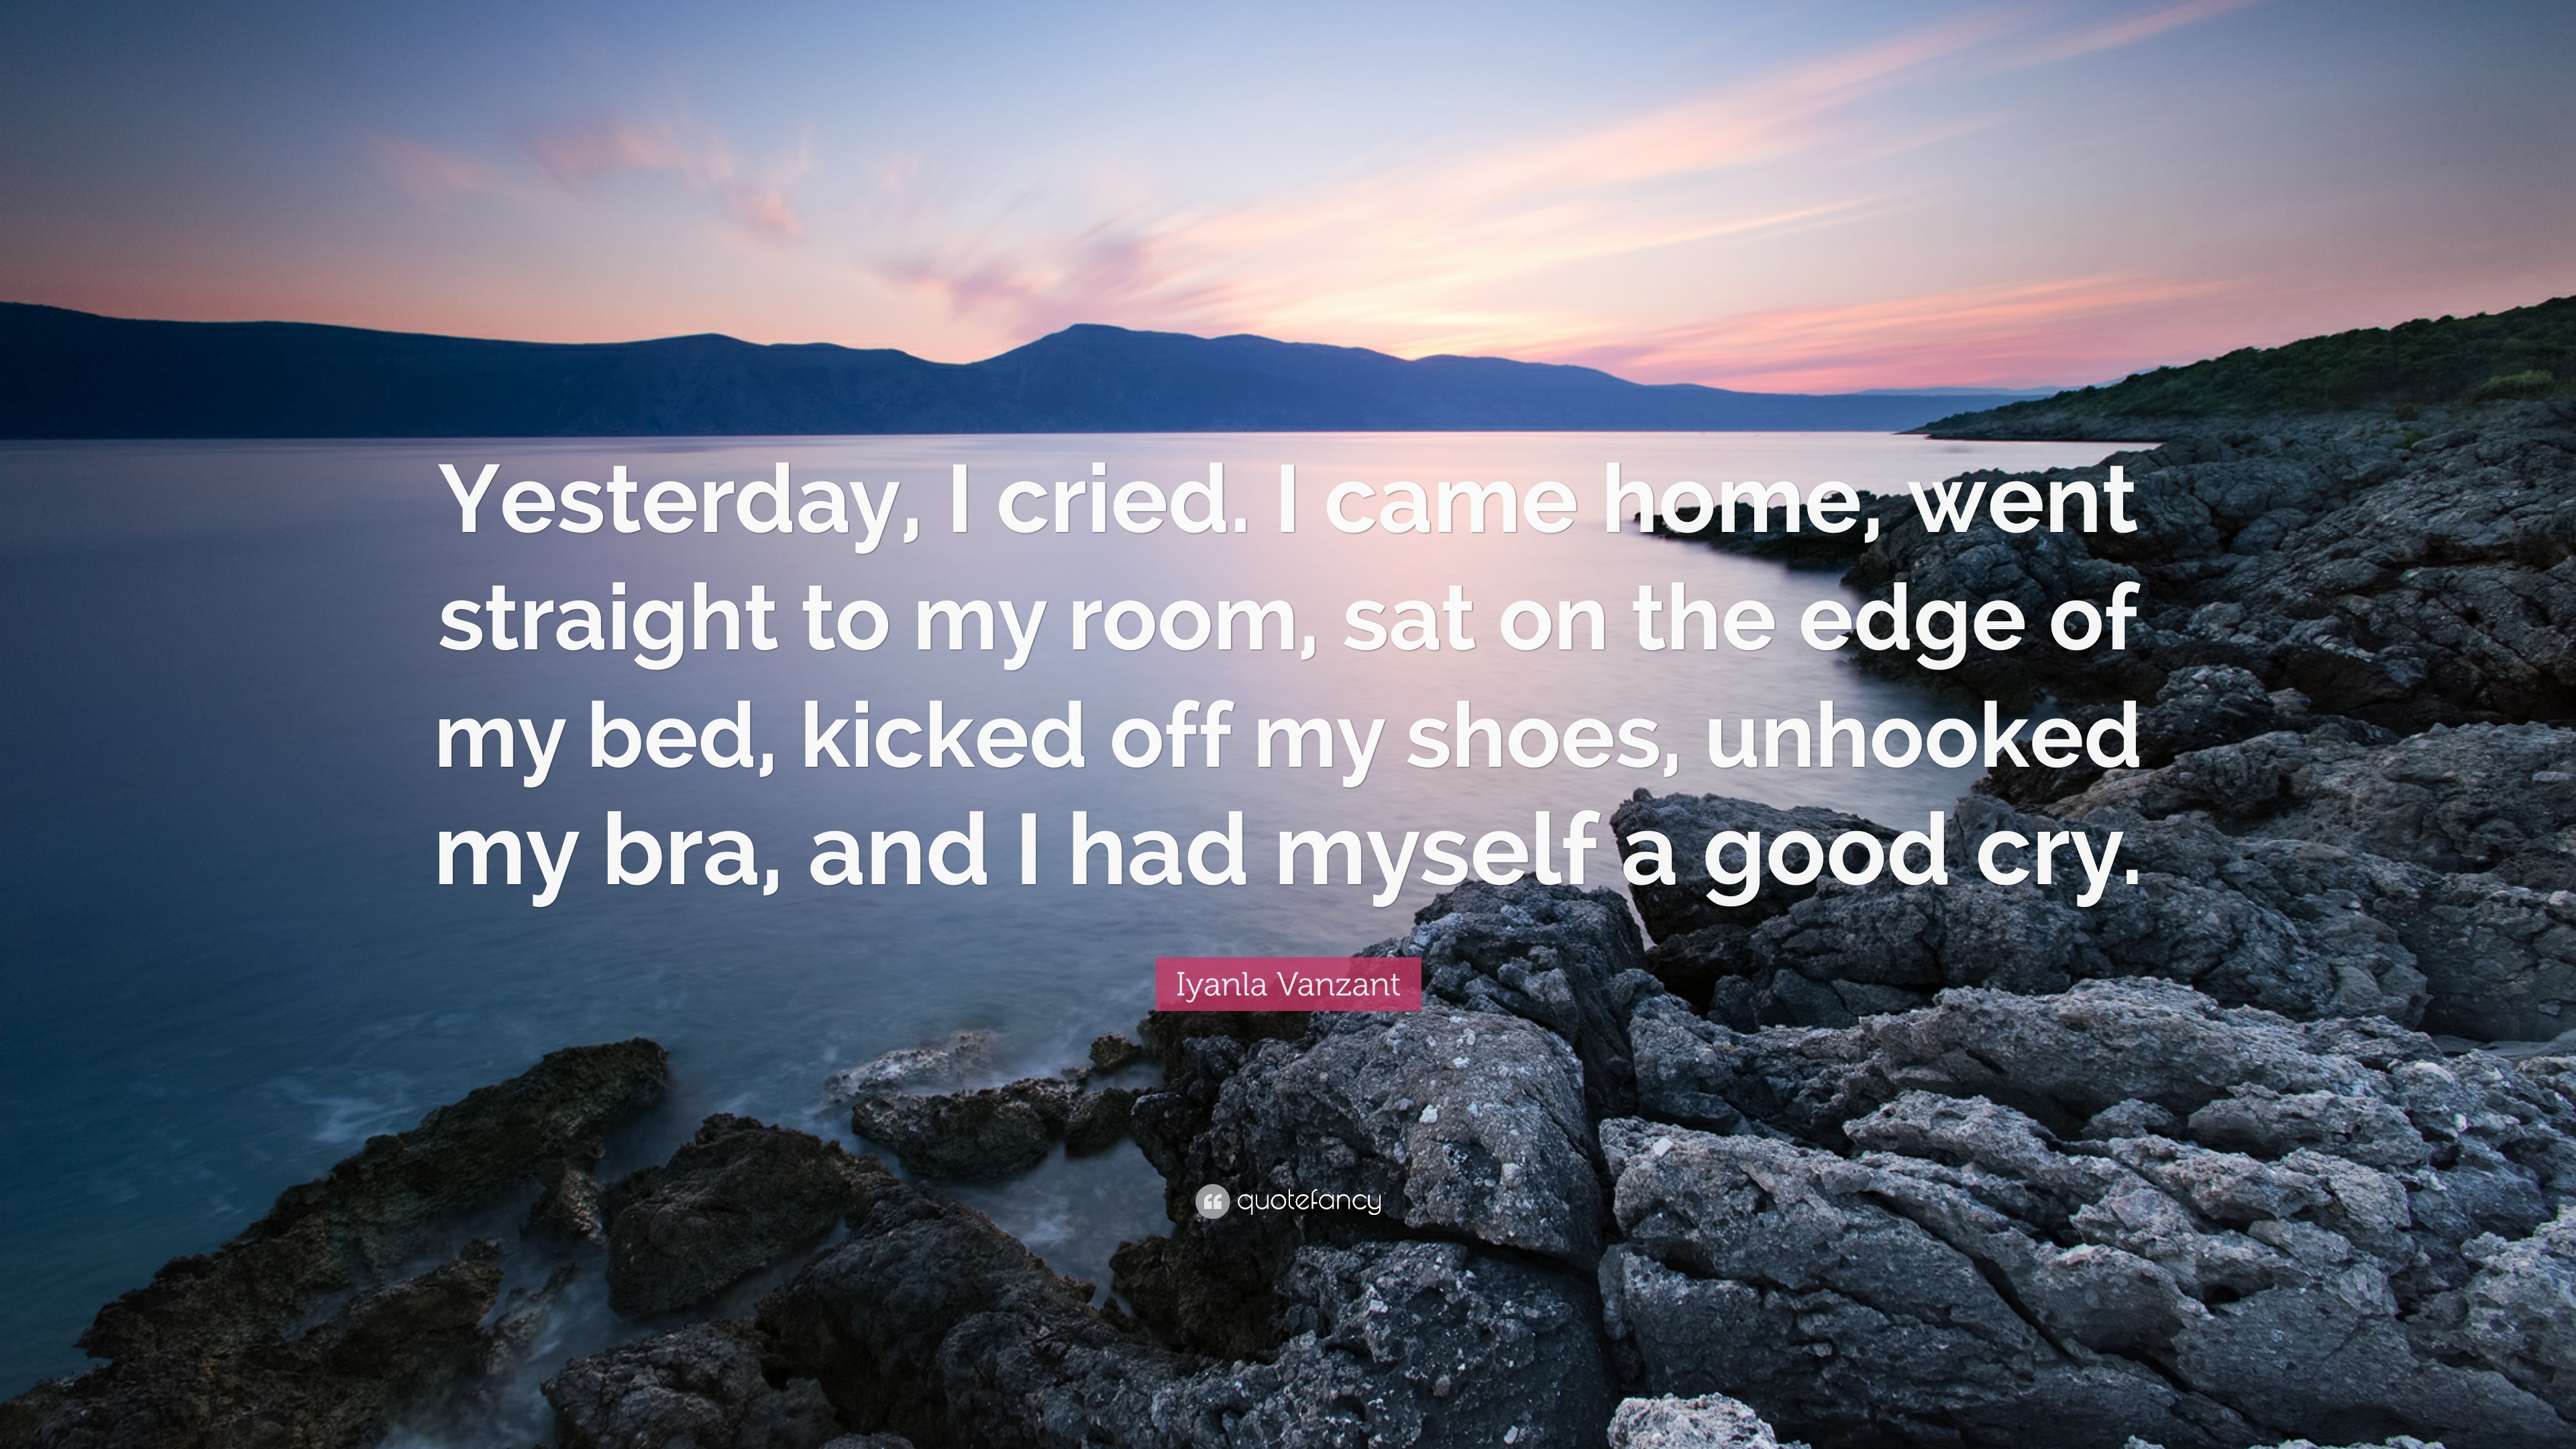 3840x2160 8 wallpapers. Iyanla Vanzant Quote: “Yesterday, I cried. I came home, went  straight